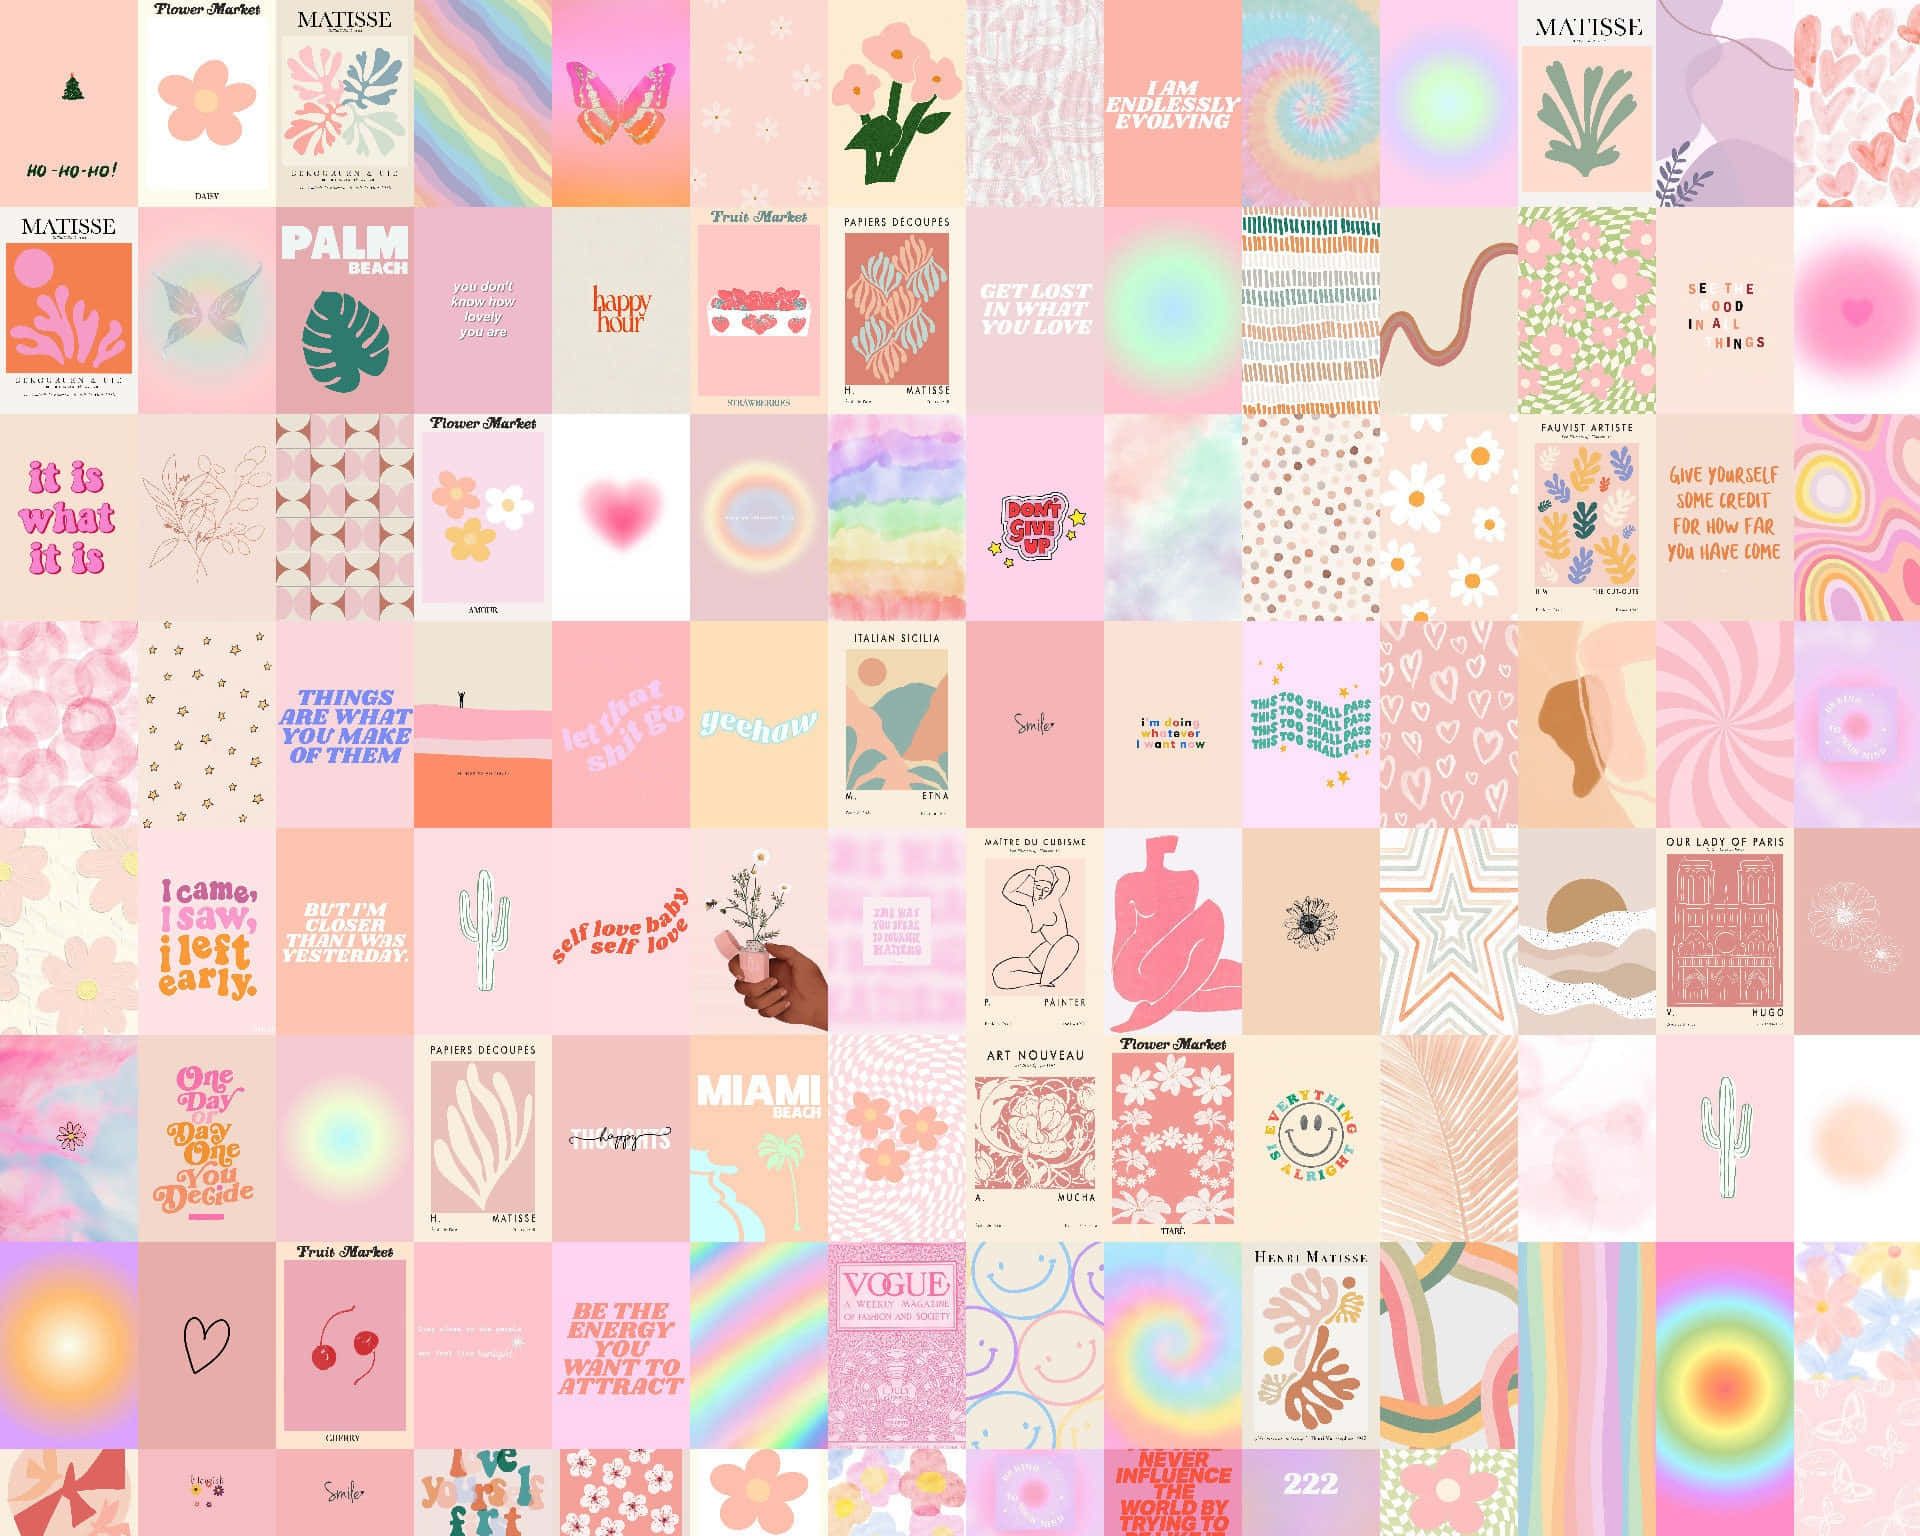 A collage of pink and white images - Danish